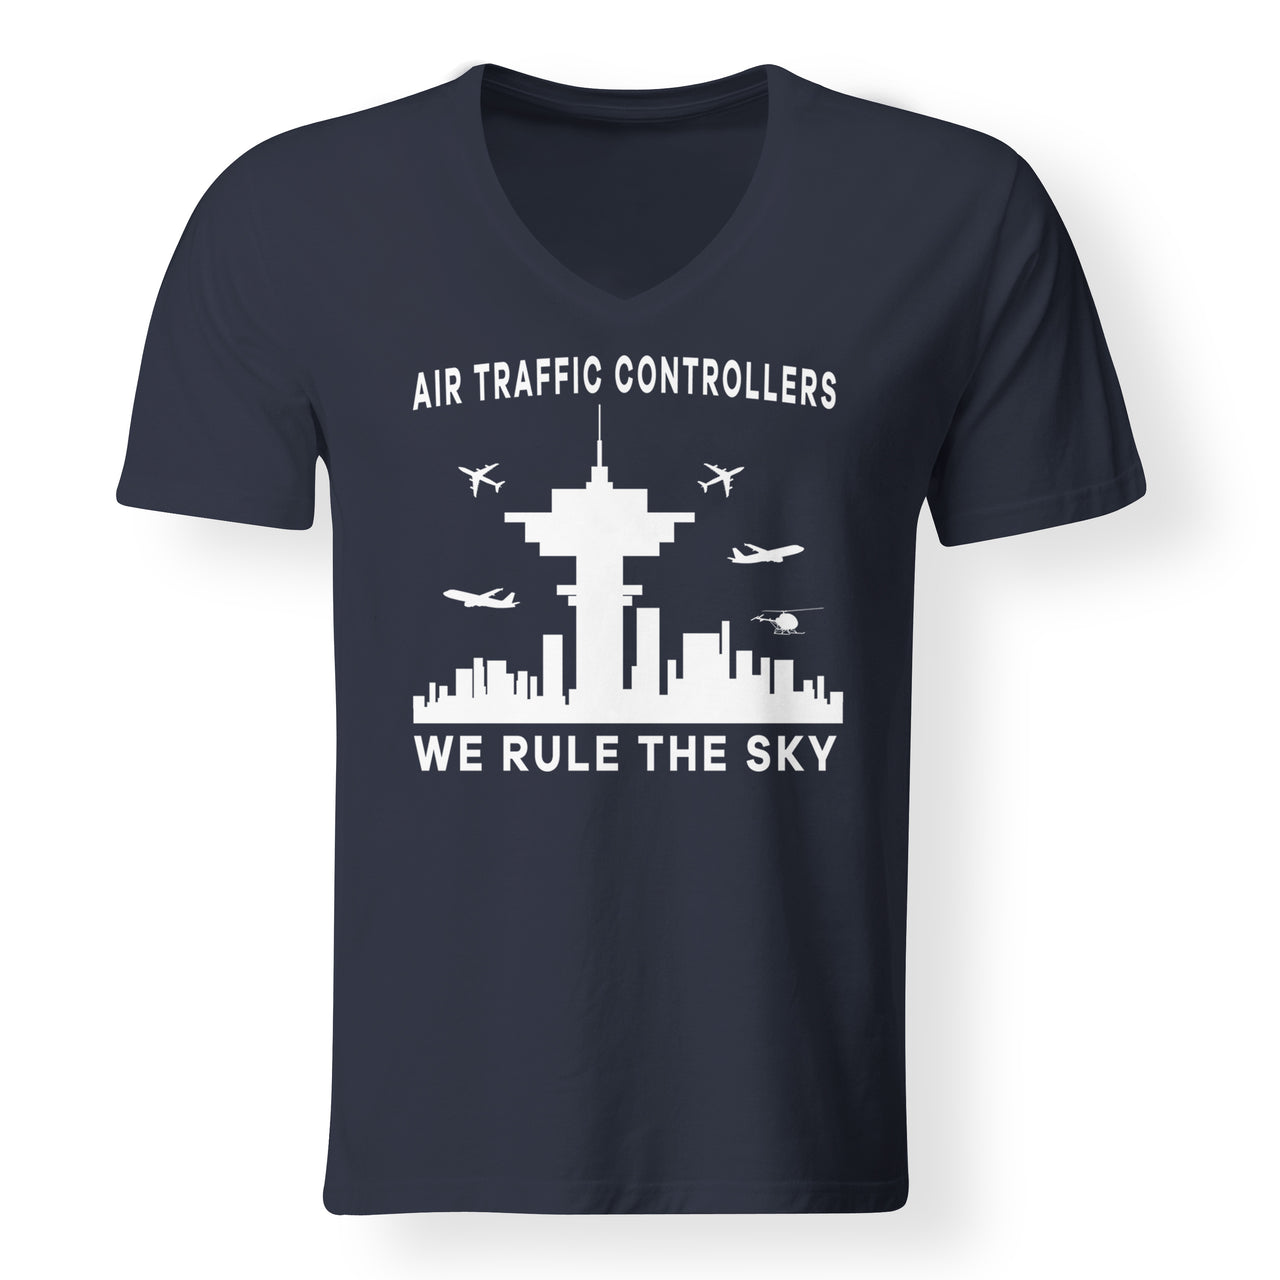 Air Traffic Controllers - We Rule The Sky Designed V-Neck T-Shirts